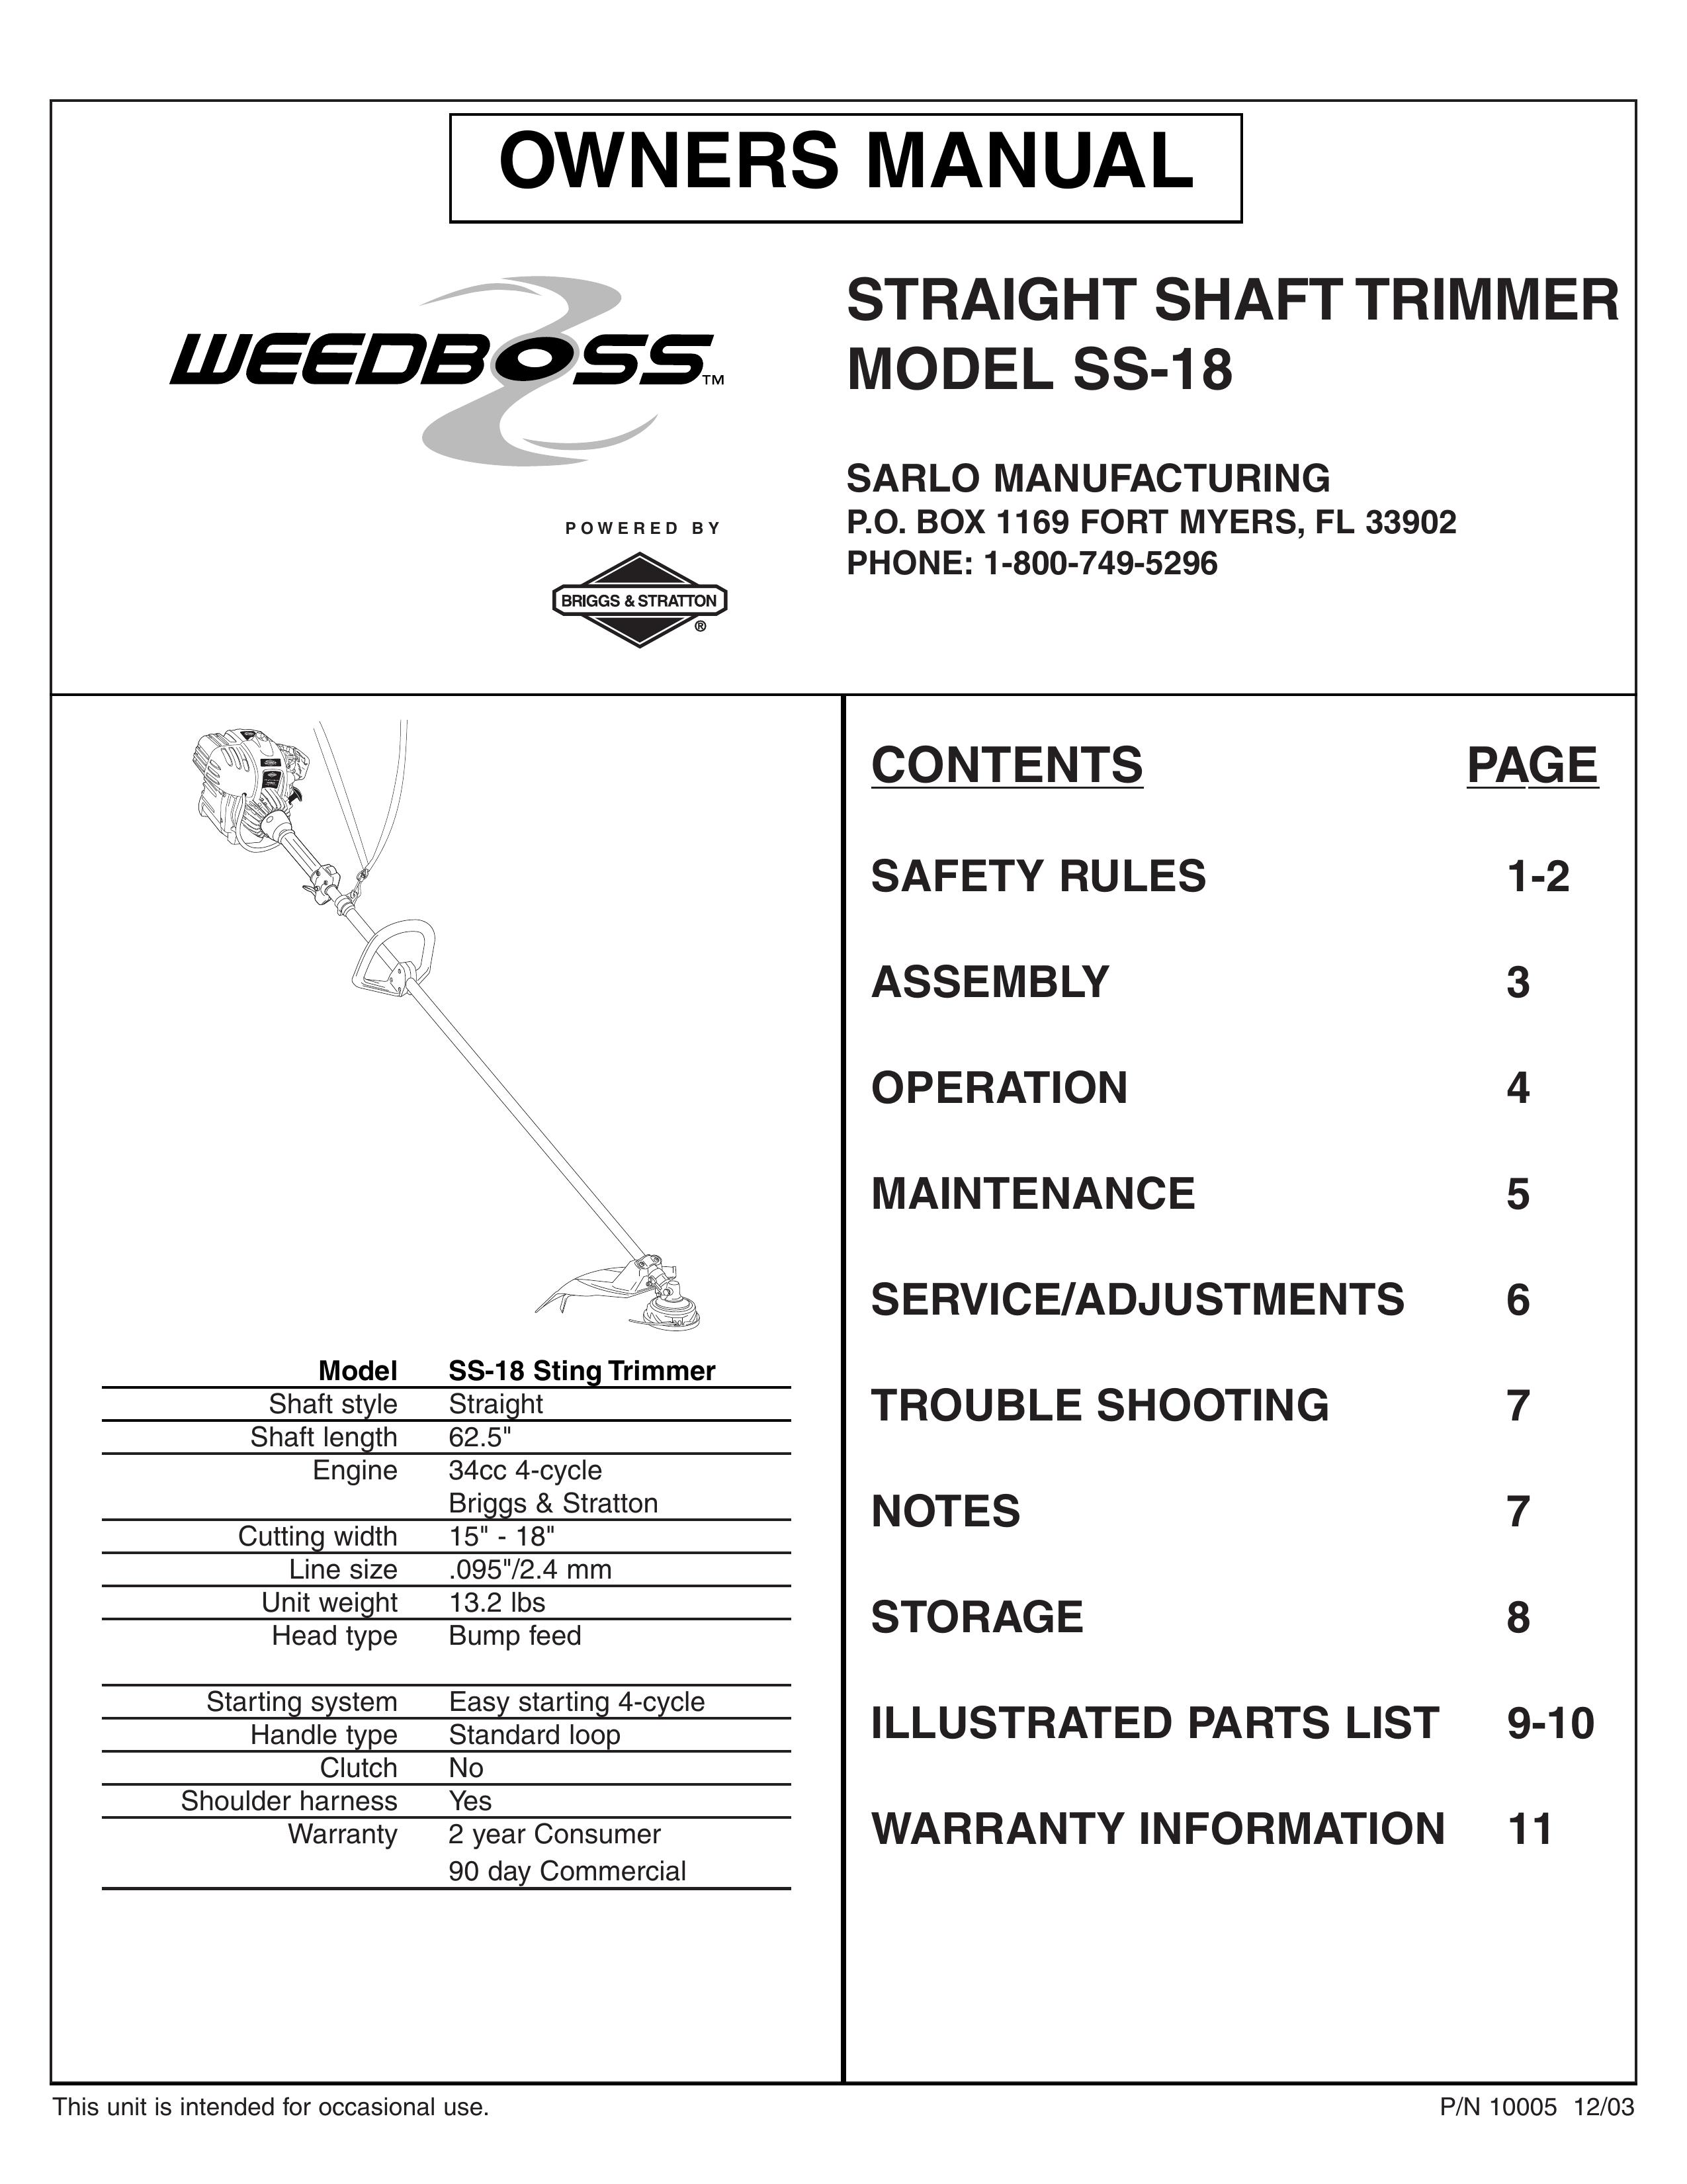 Sarlo SS-18 Trimmer User Manual